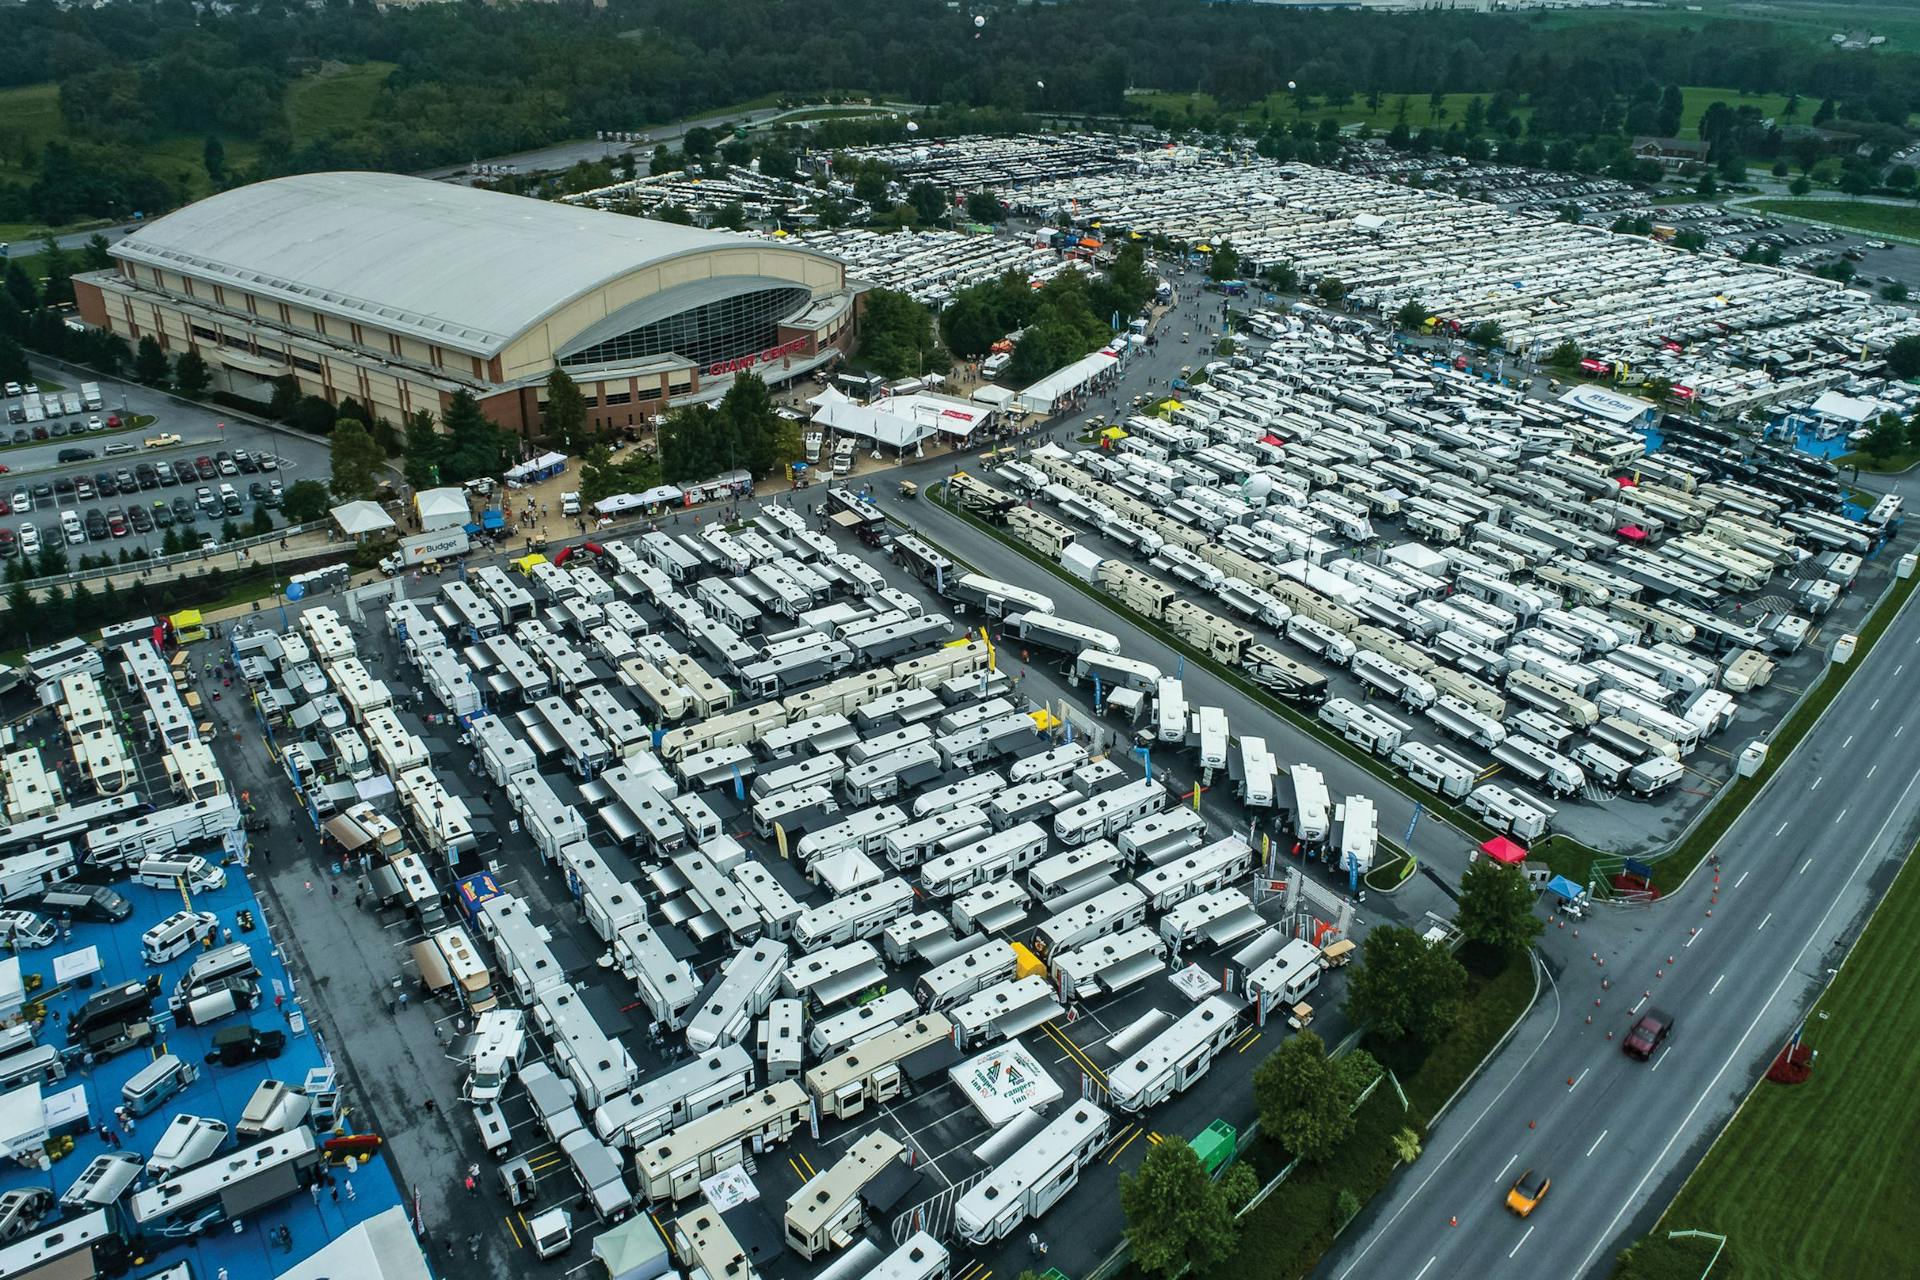 10 Compelling Reasons to Attend Hershey America's Largest RV Show®